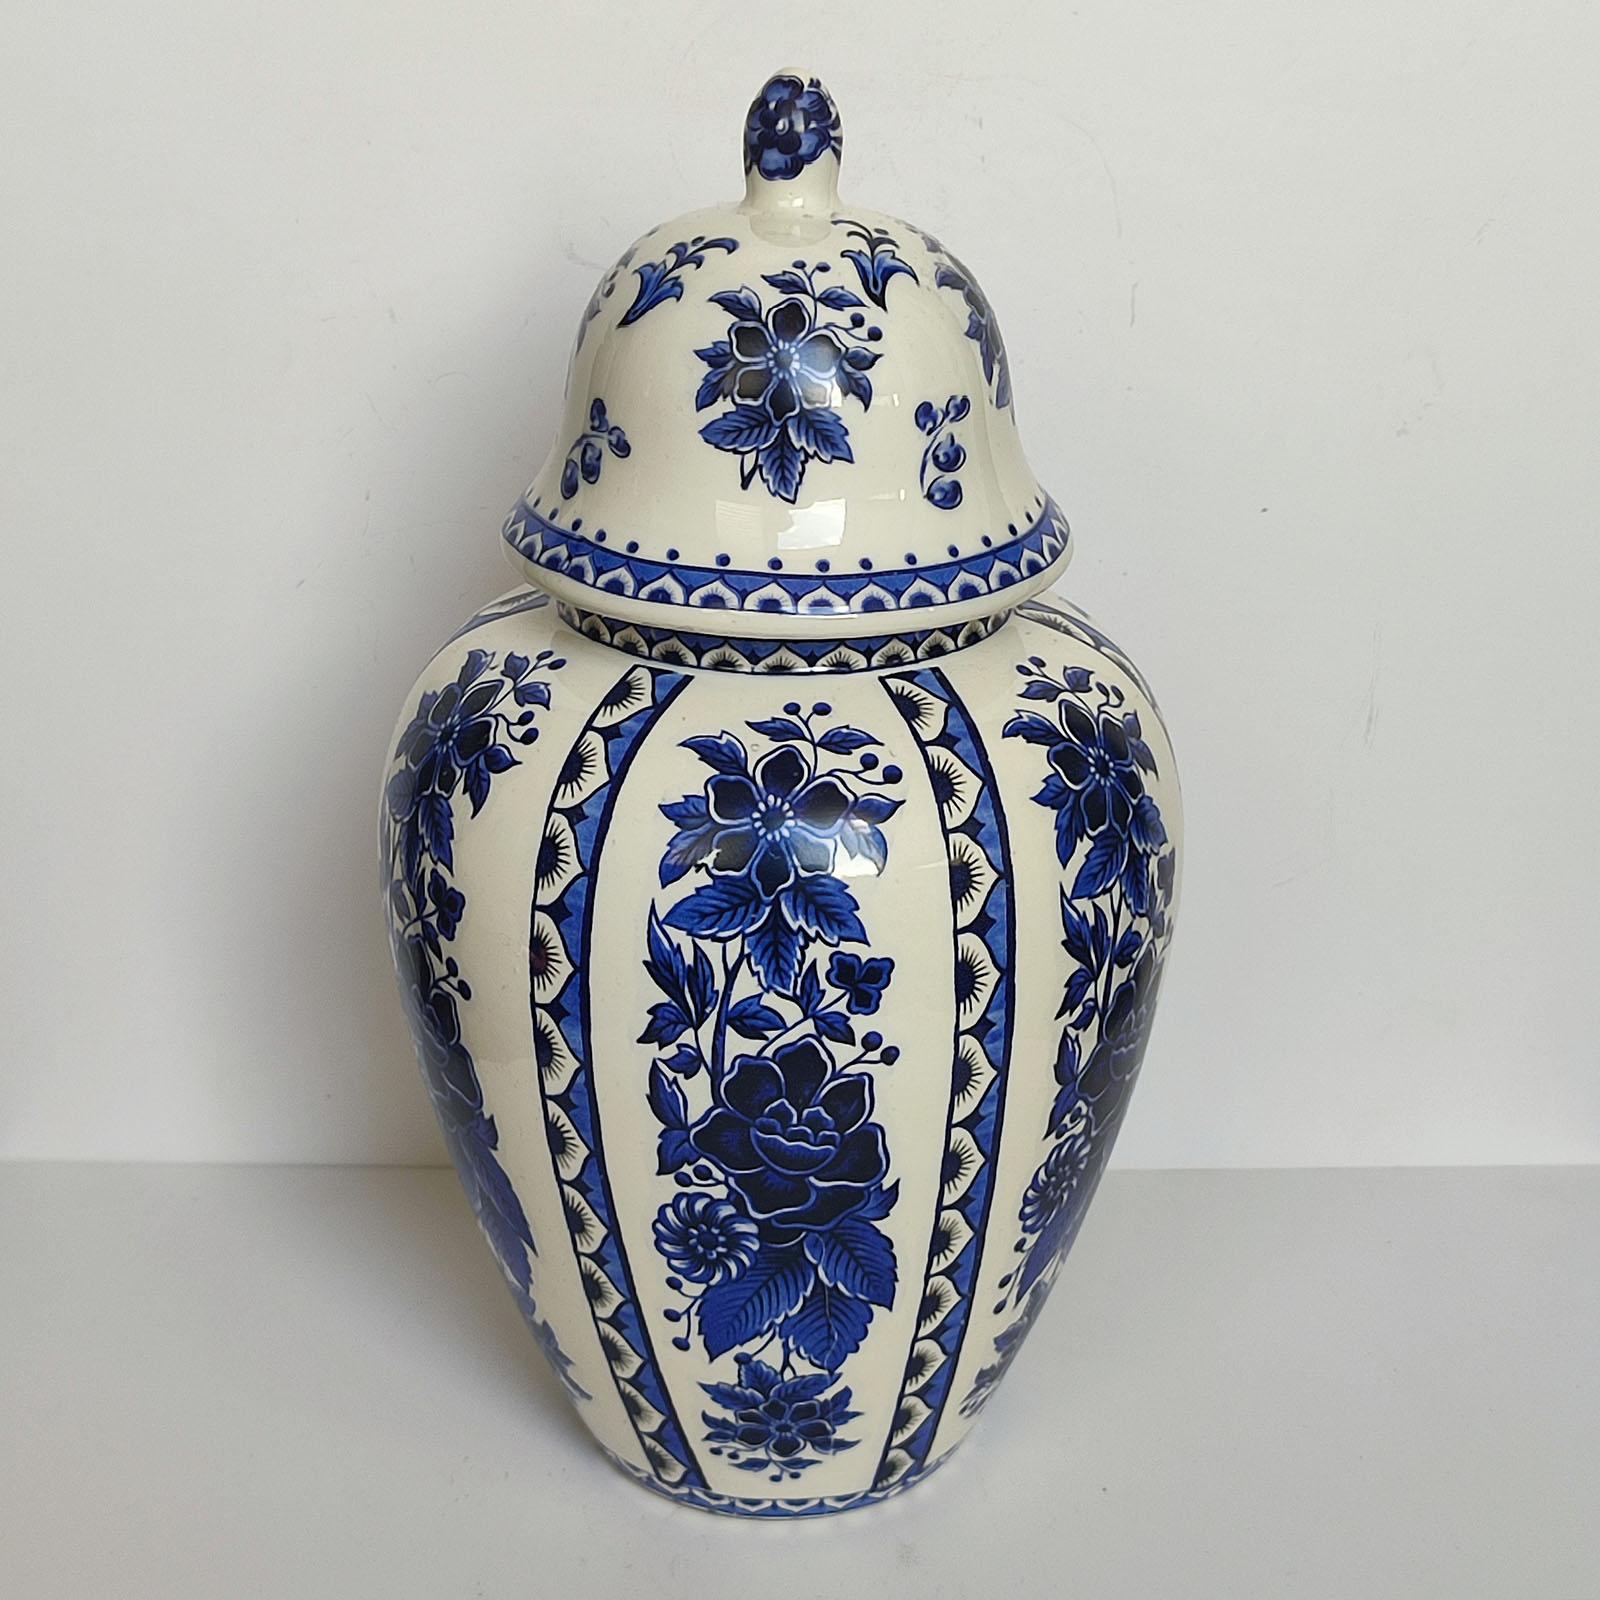 Vintage Large Delft Vase with Lid, midcentury, White Glaze with Blue Decor.
Covered vase made of ceramic with white glaze and blue floral decor. Marked under the bottom Delft.
Height 36 cm [14.2 in.]
FREE SHIPPING via regular post, on request we